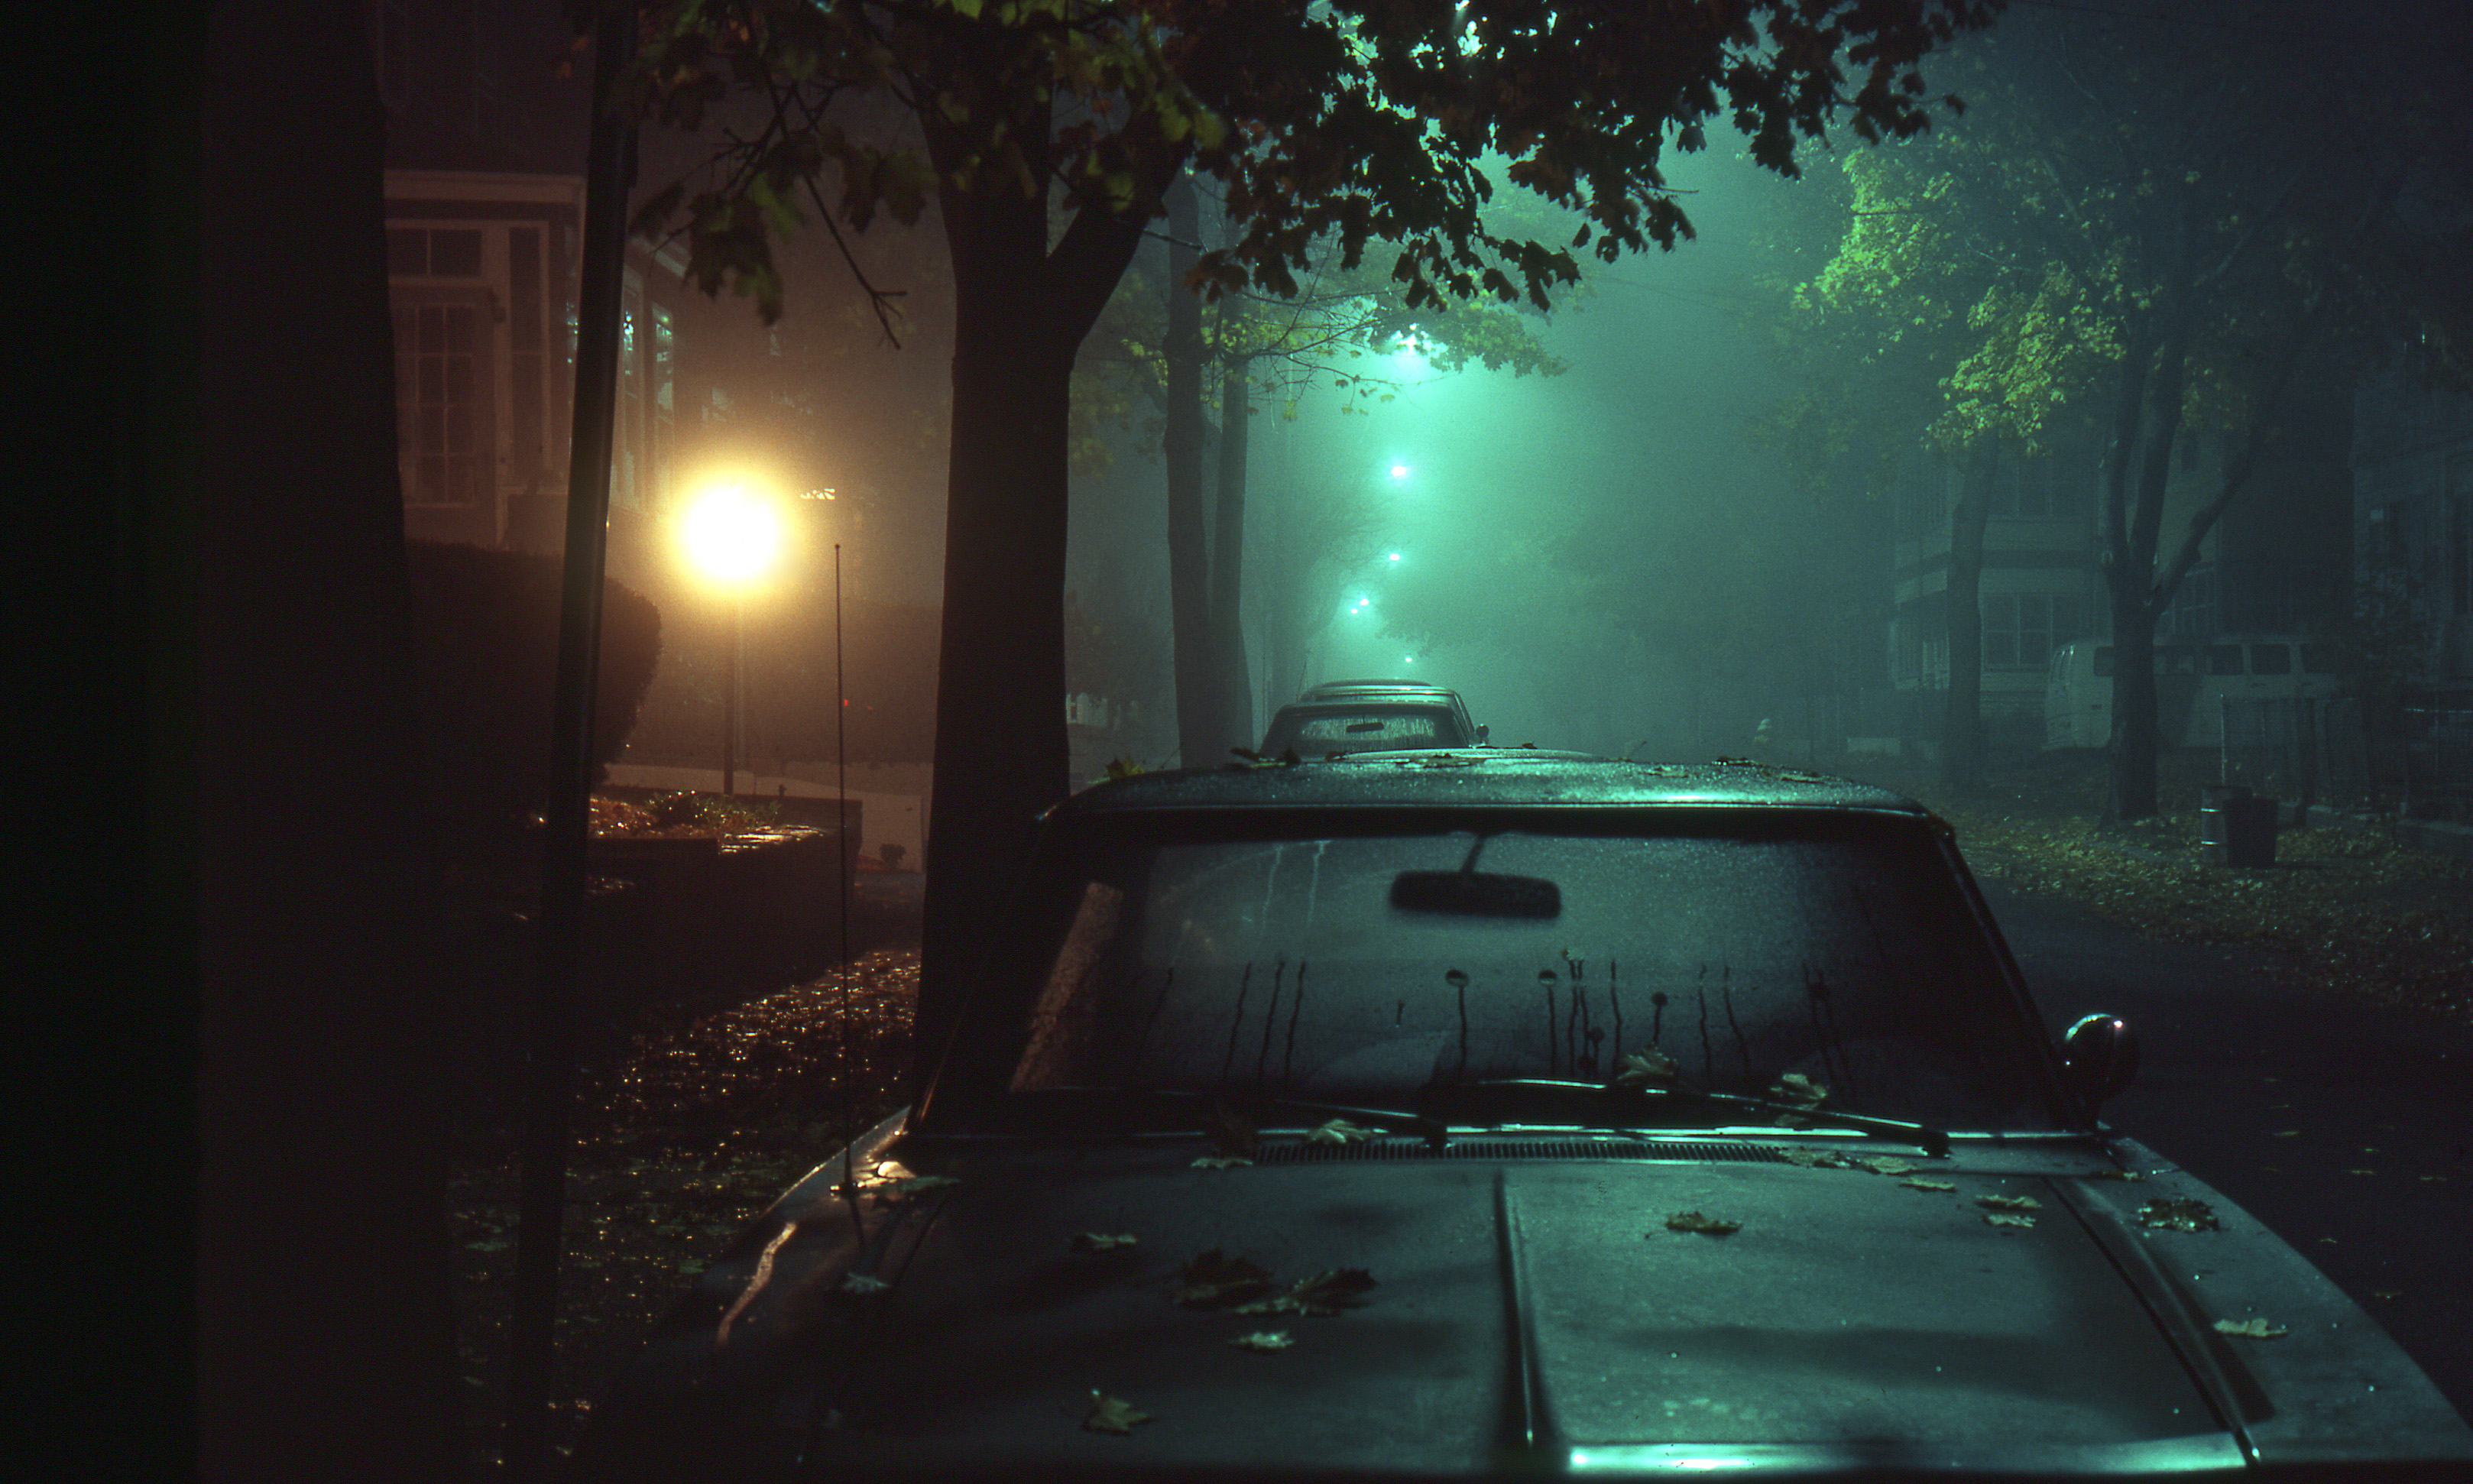 Medford, Massachusetts, Fall 1978. Misty; wet; the smell of wet leaves and the quiet. From a Kodachrome slide I took with a Nikon FM camera. View full size.